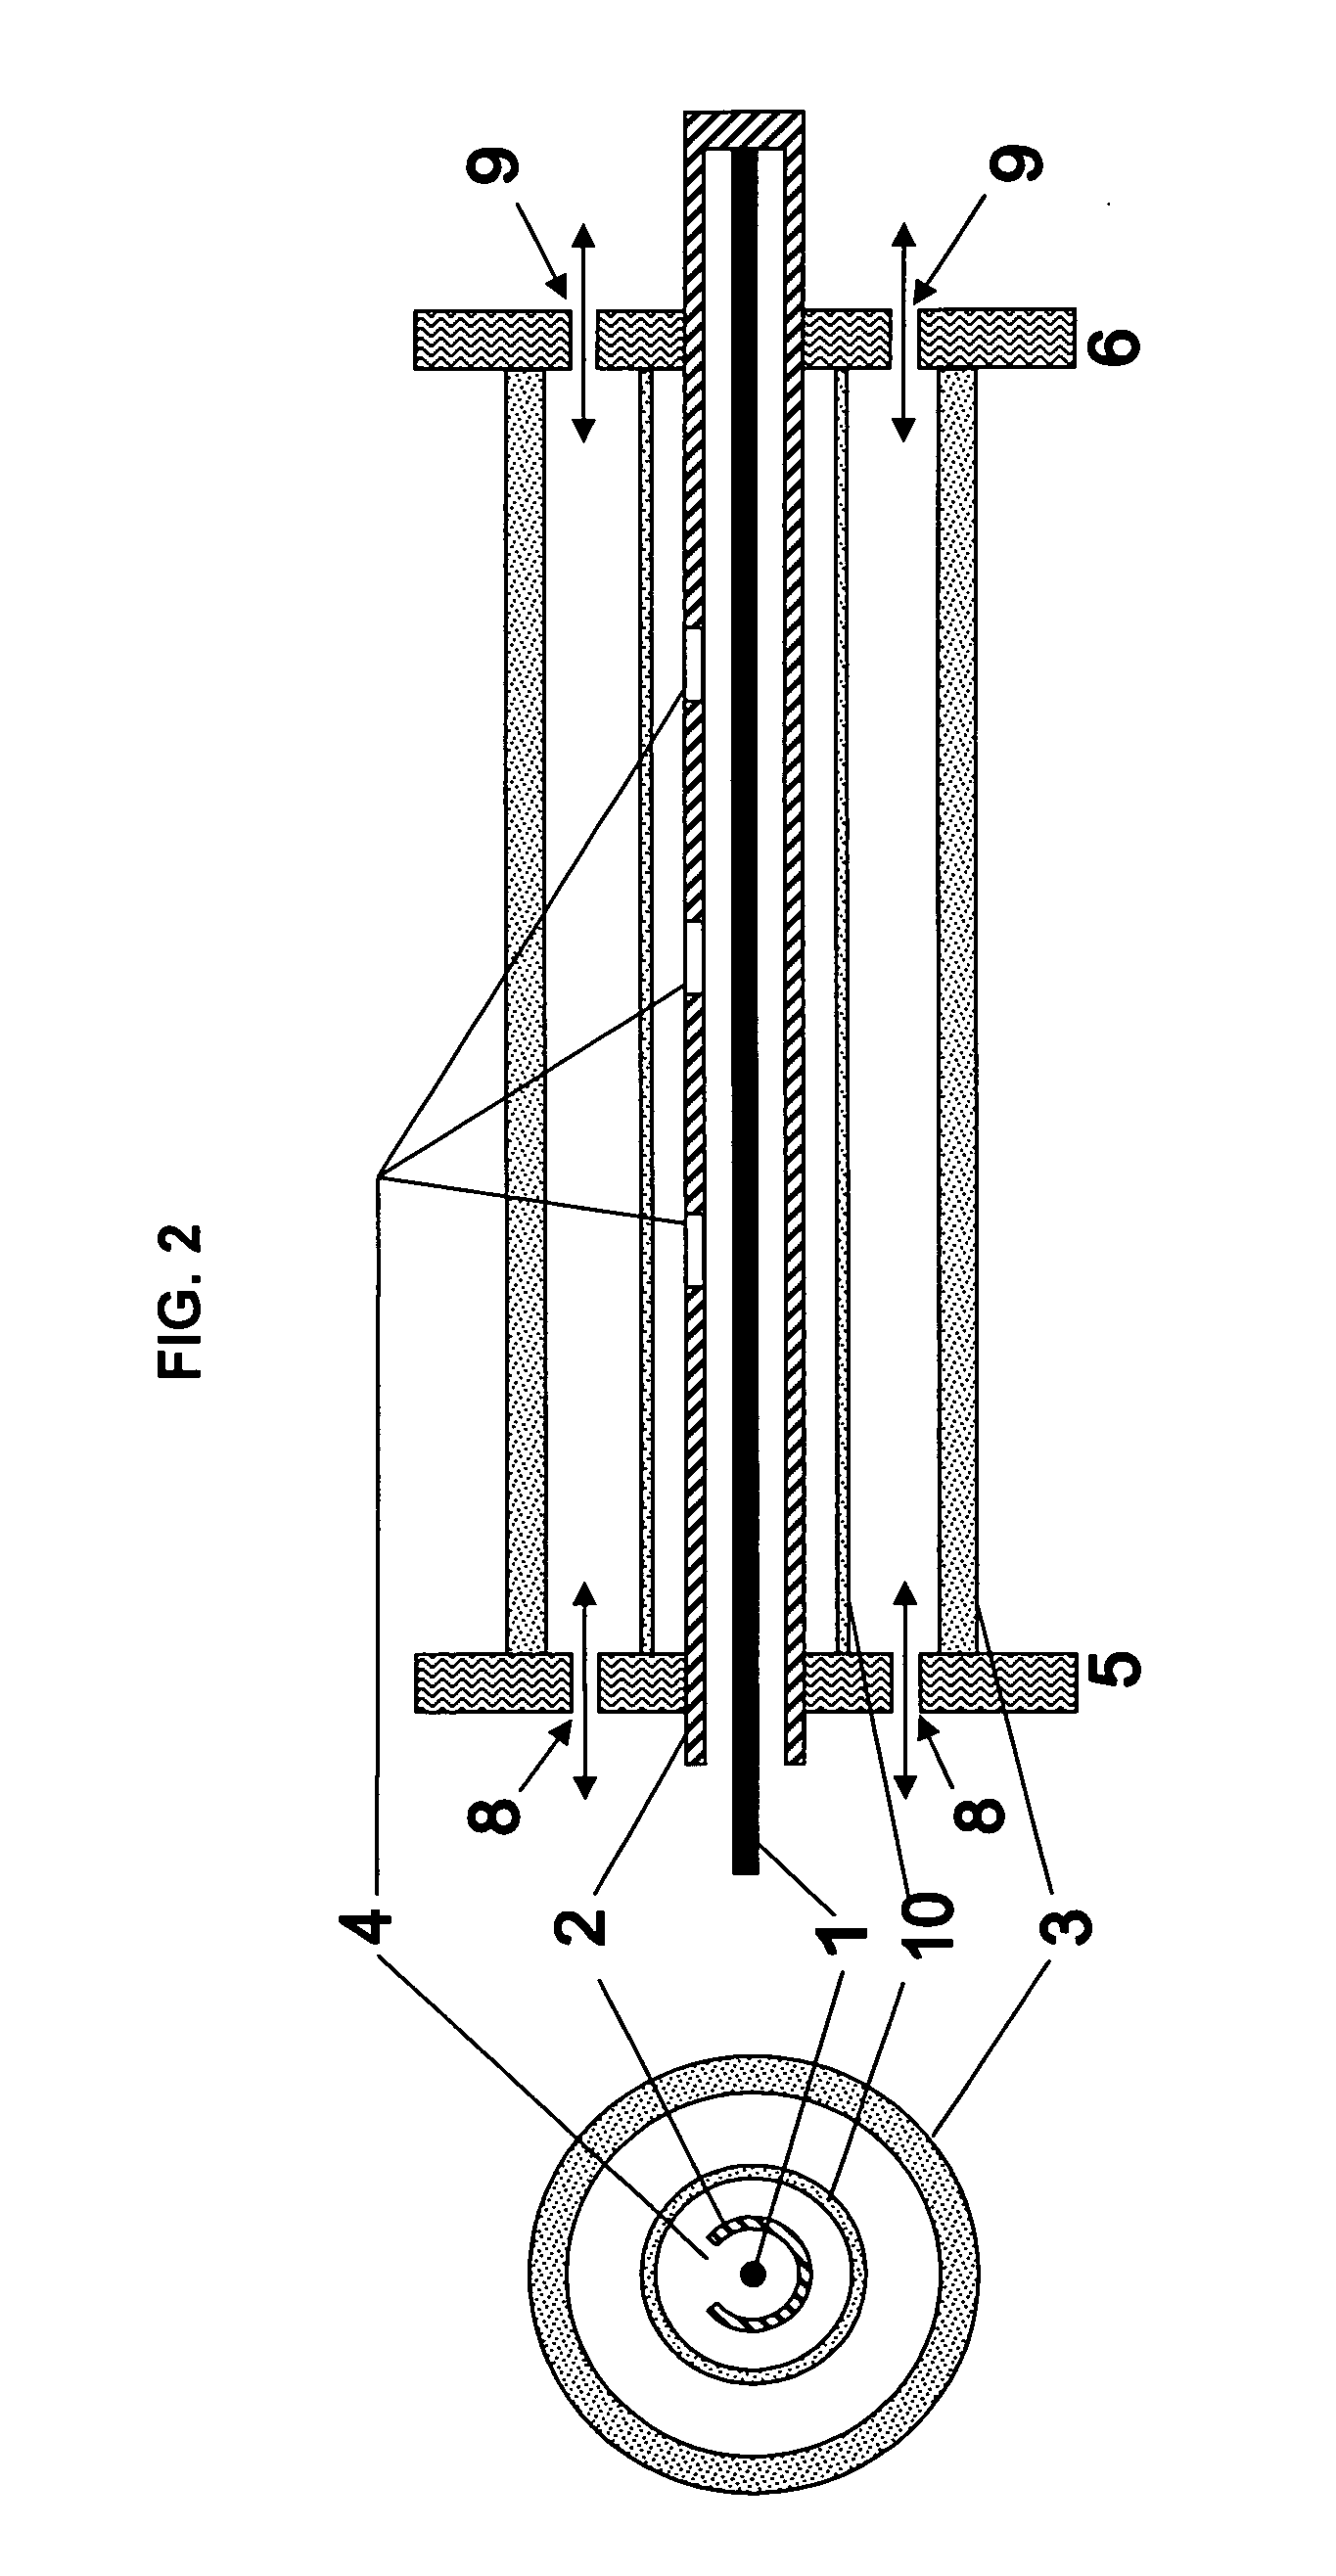 Device and method for producing high power microwave plasma